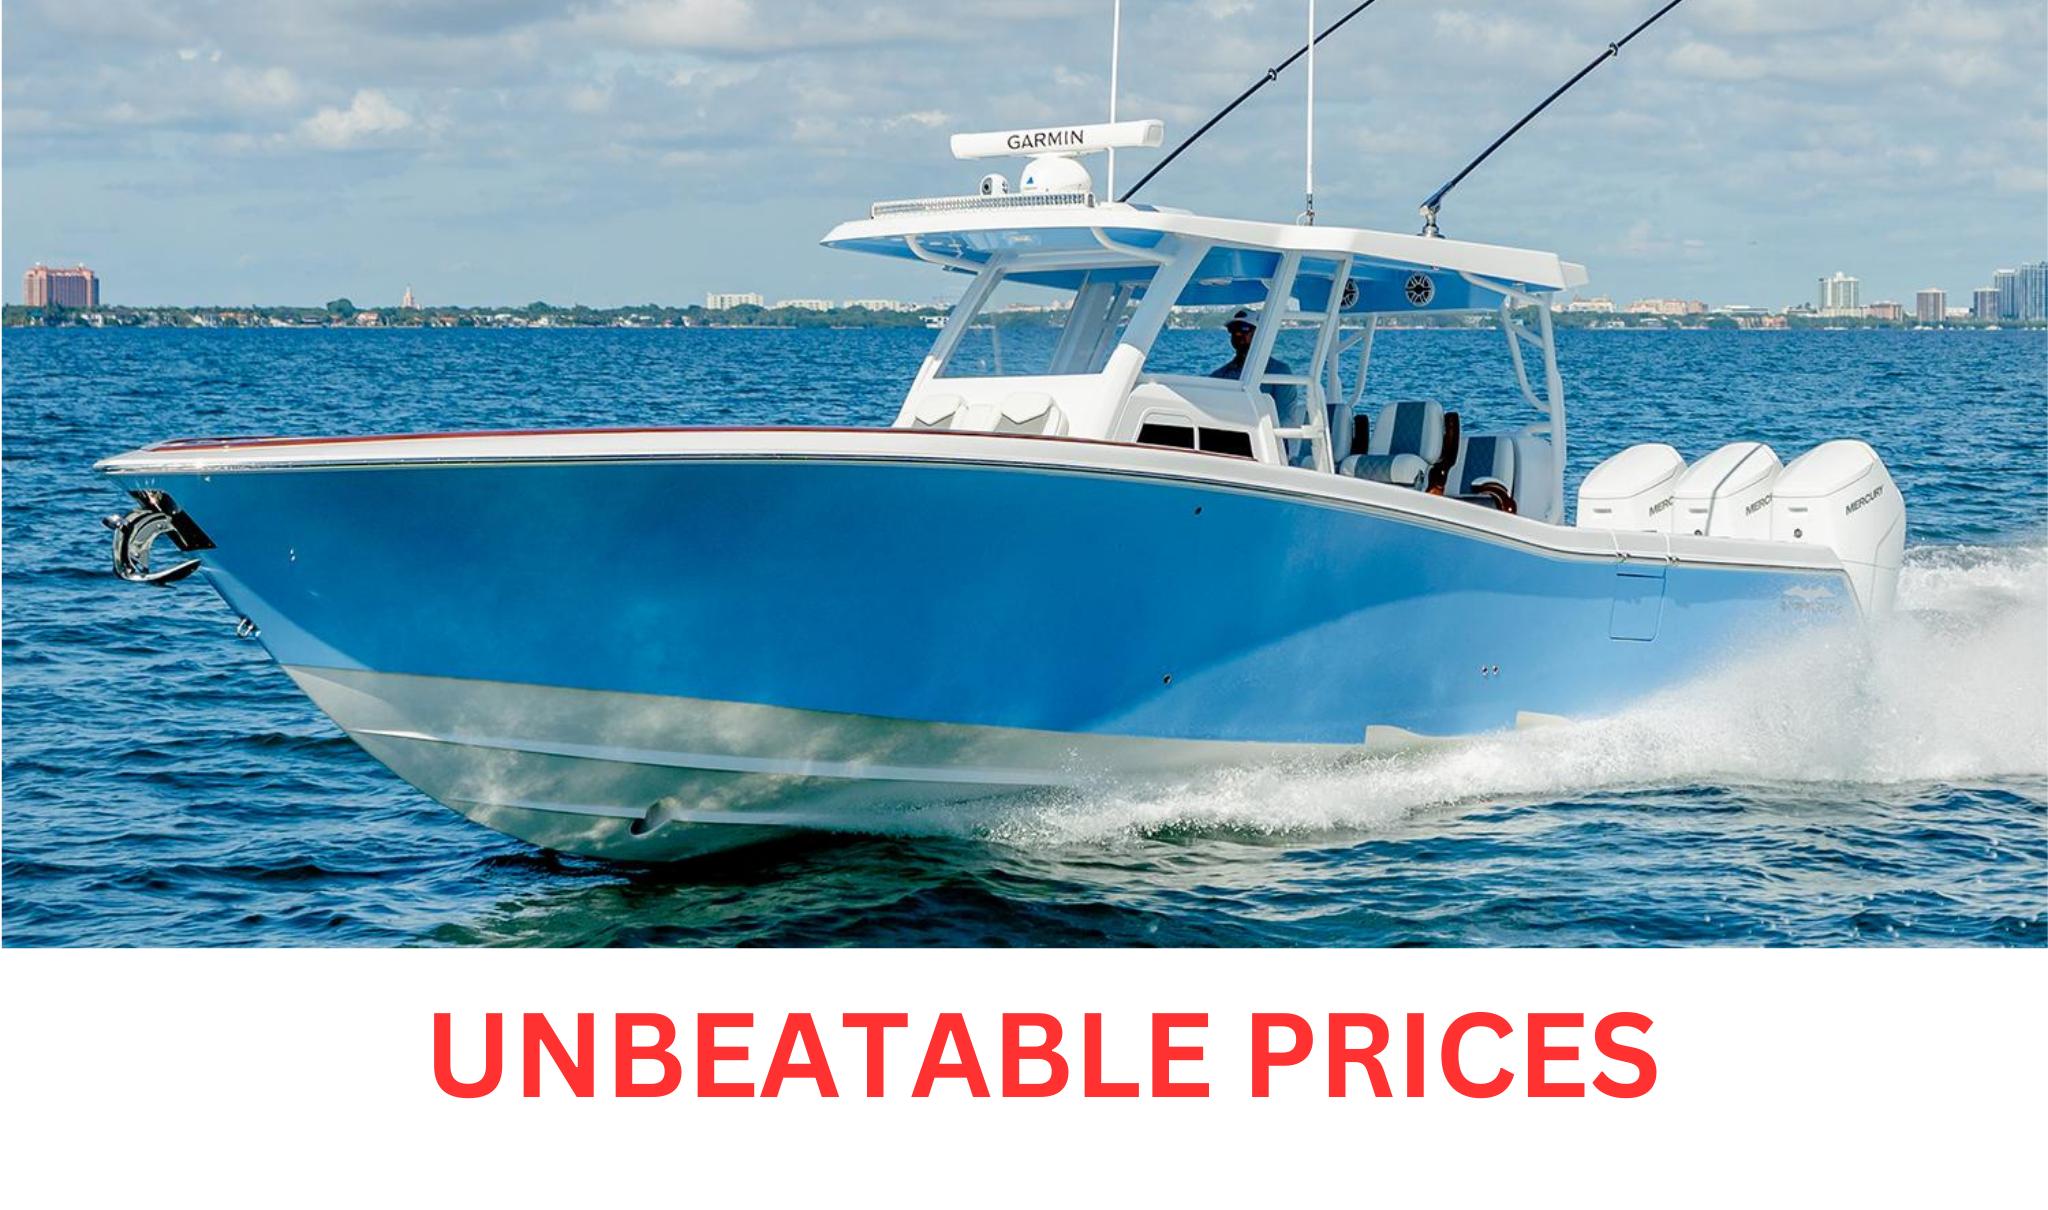 Invincible boats for sale - 2 of 6 pages - Boat Trader